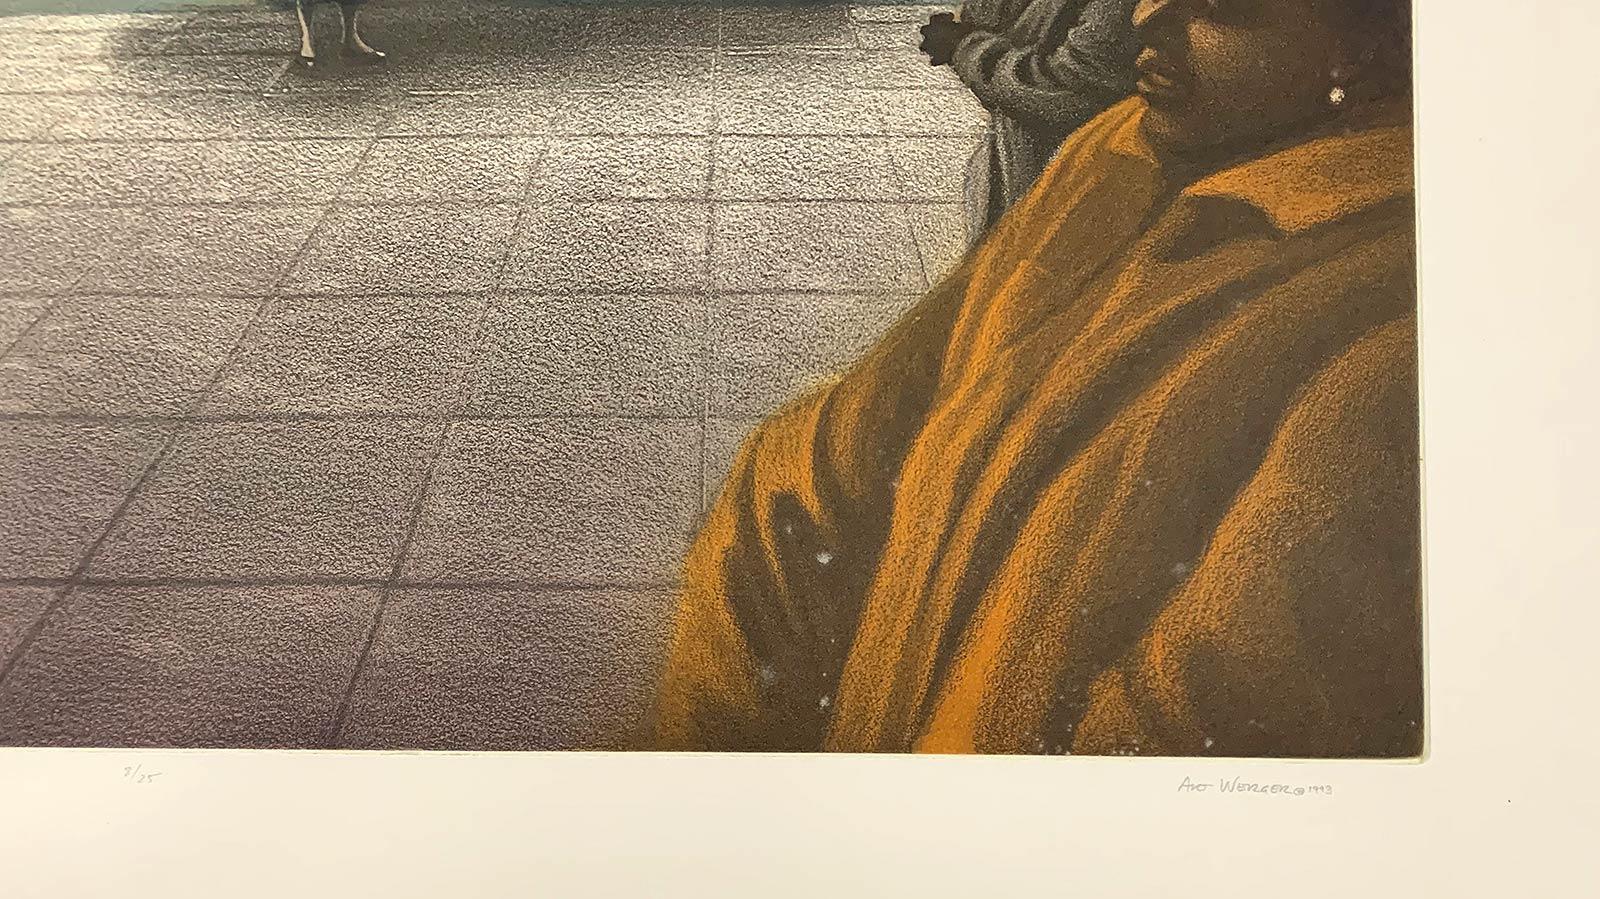 Art Werger's color etching is pencil signed and numbered #8 of an edition of 25

Art Werger was born in Ridgewood, New Jersey in 1955. He received a Bachelor of Fine Arts from the Rhode Island School of Design in 1978 and a Master of Fine Arts